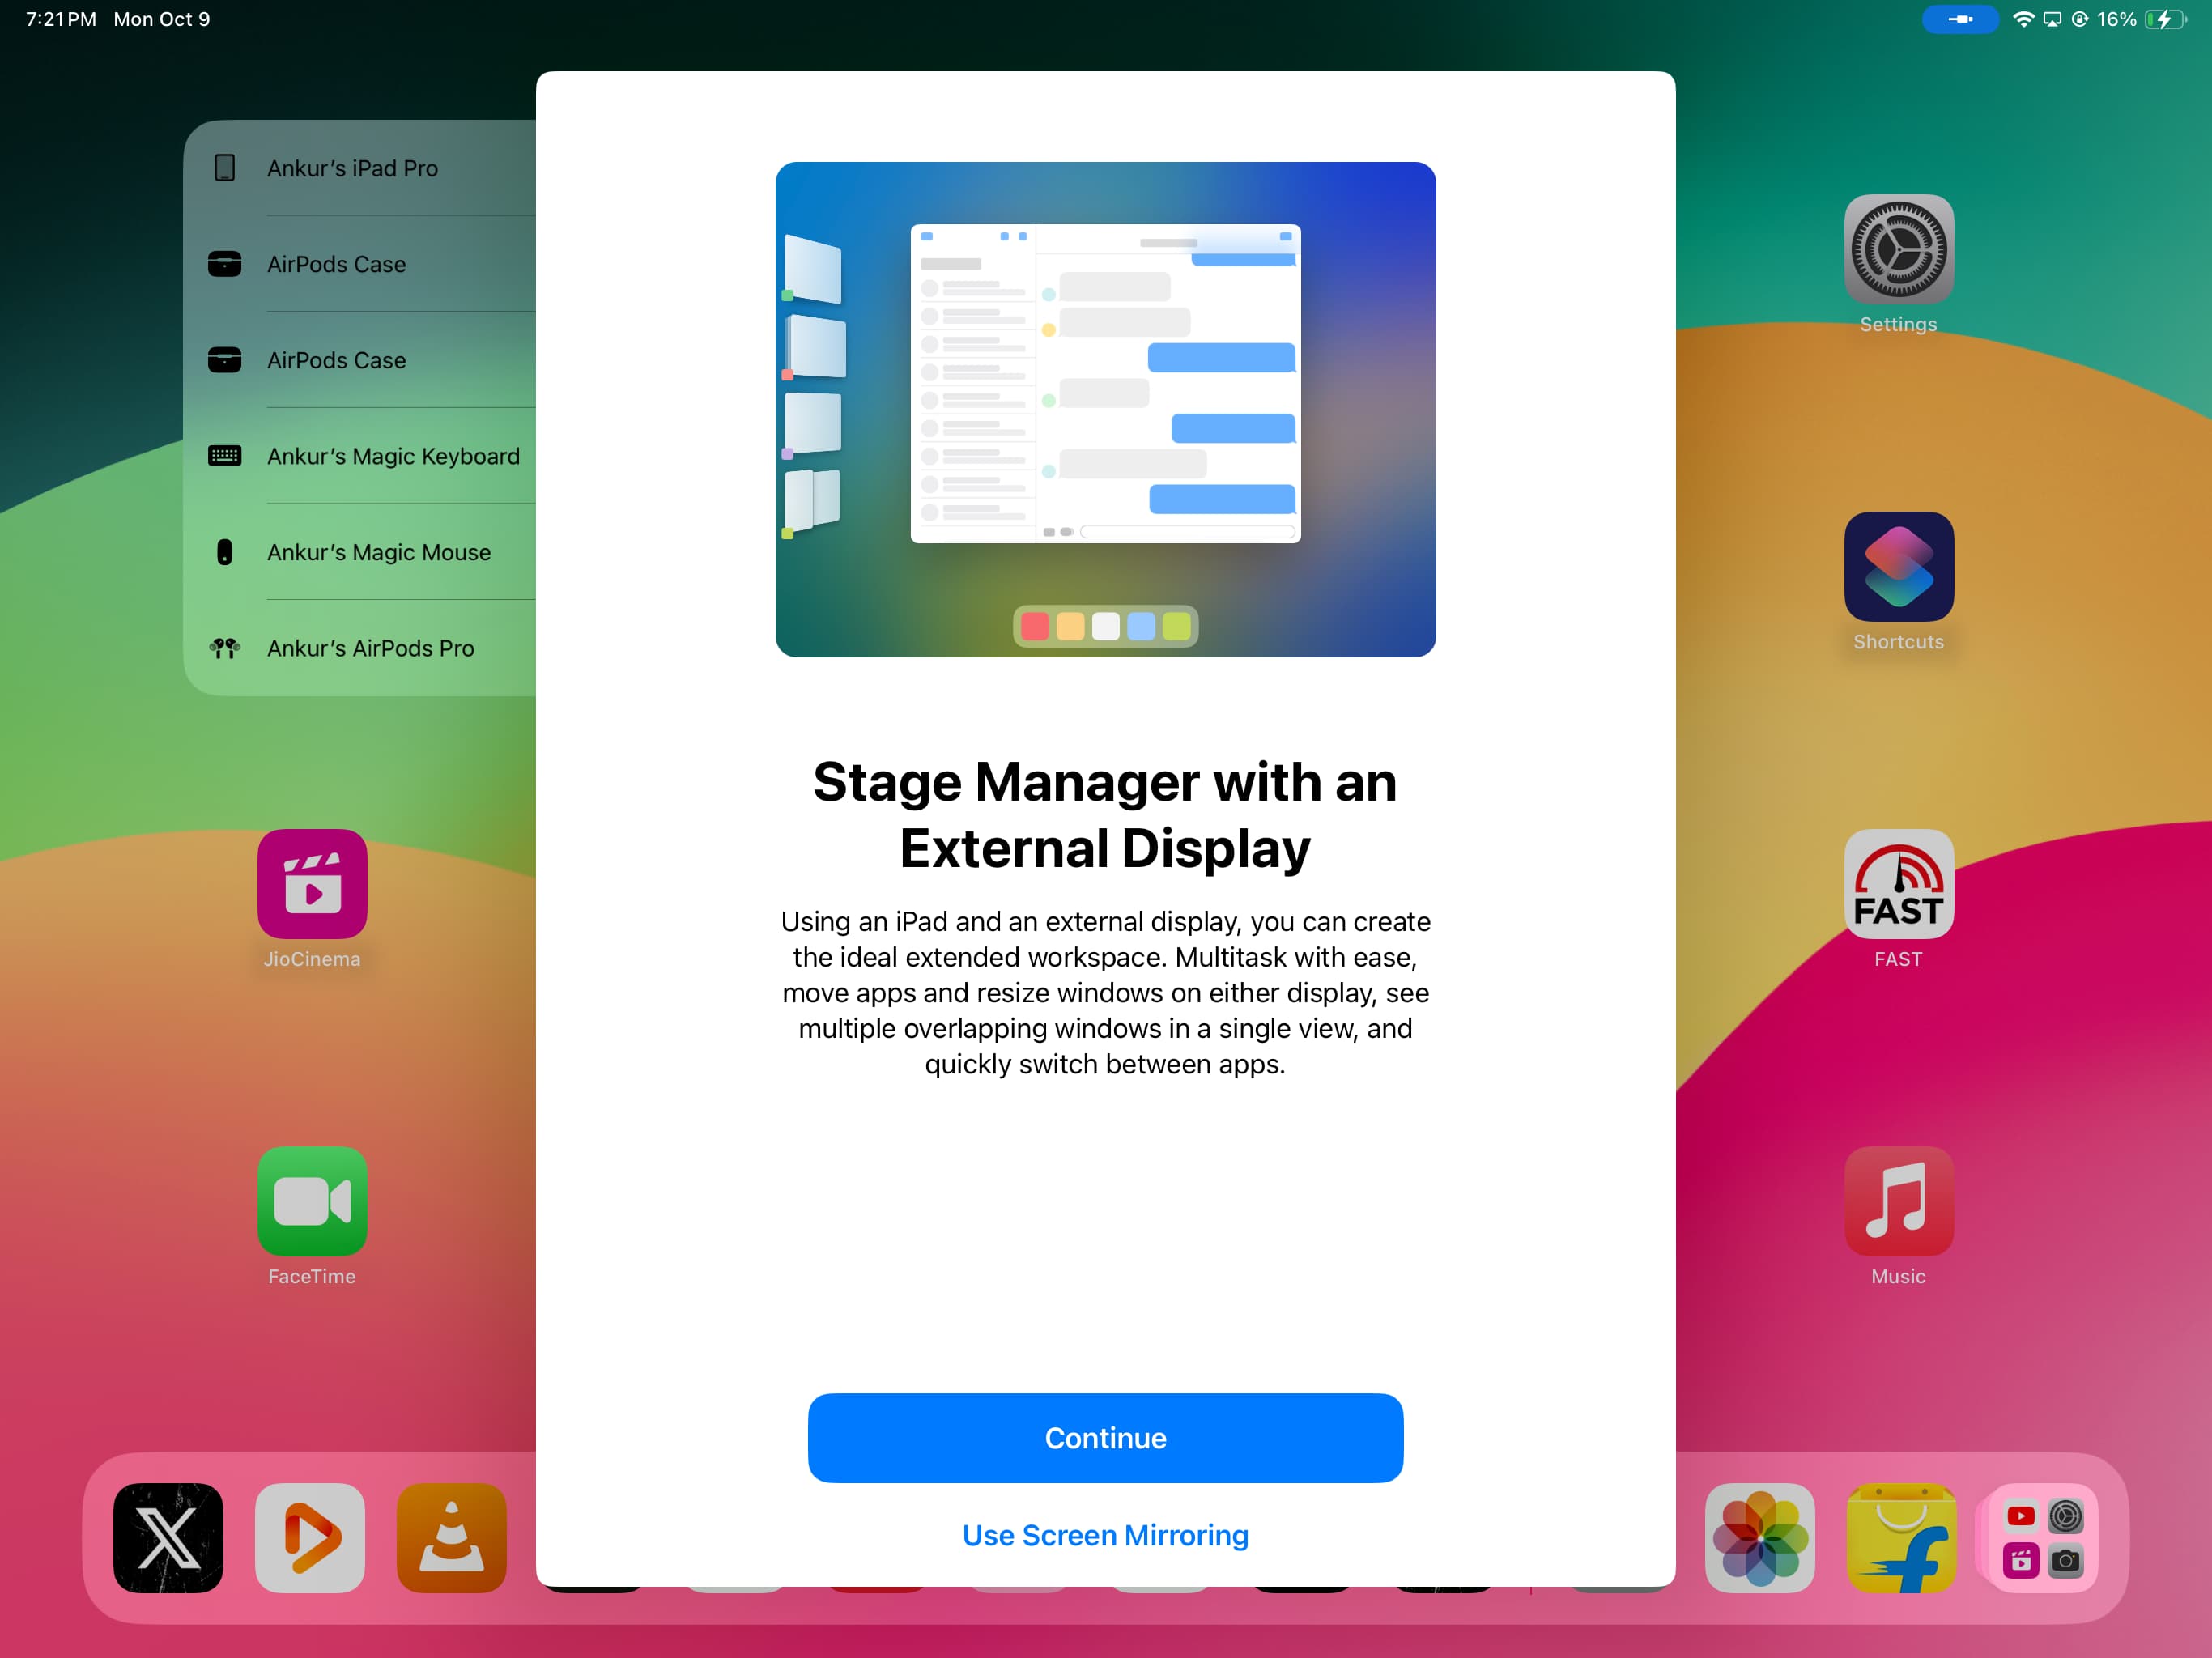 Use Stage Manager with an External Display on iPad